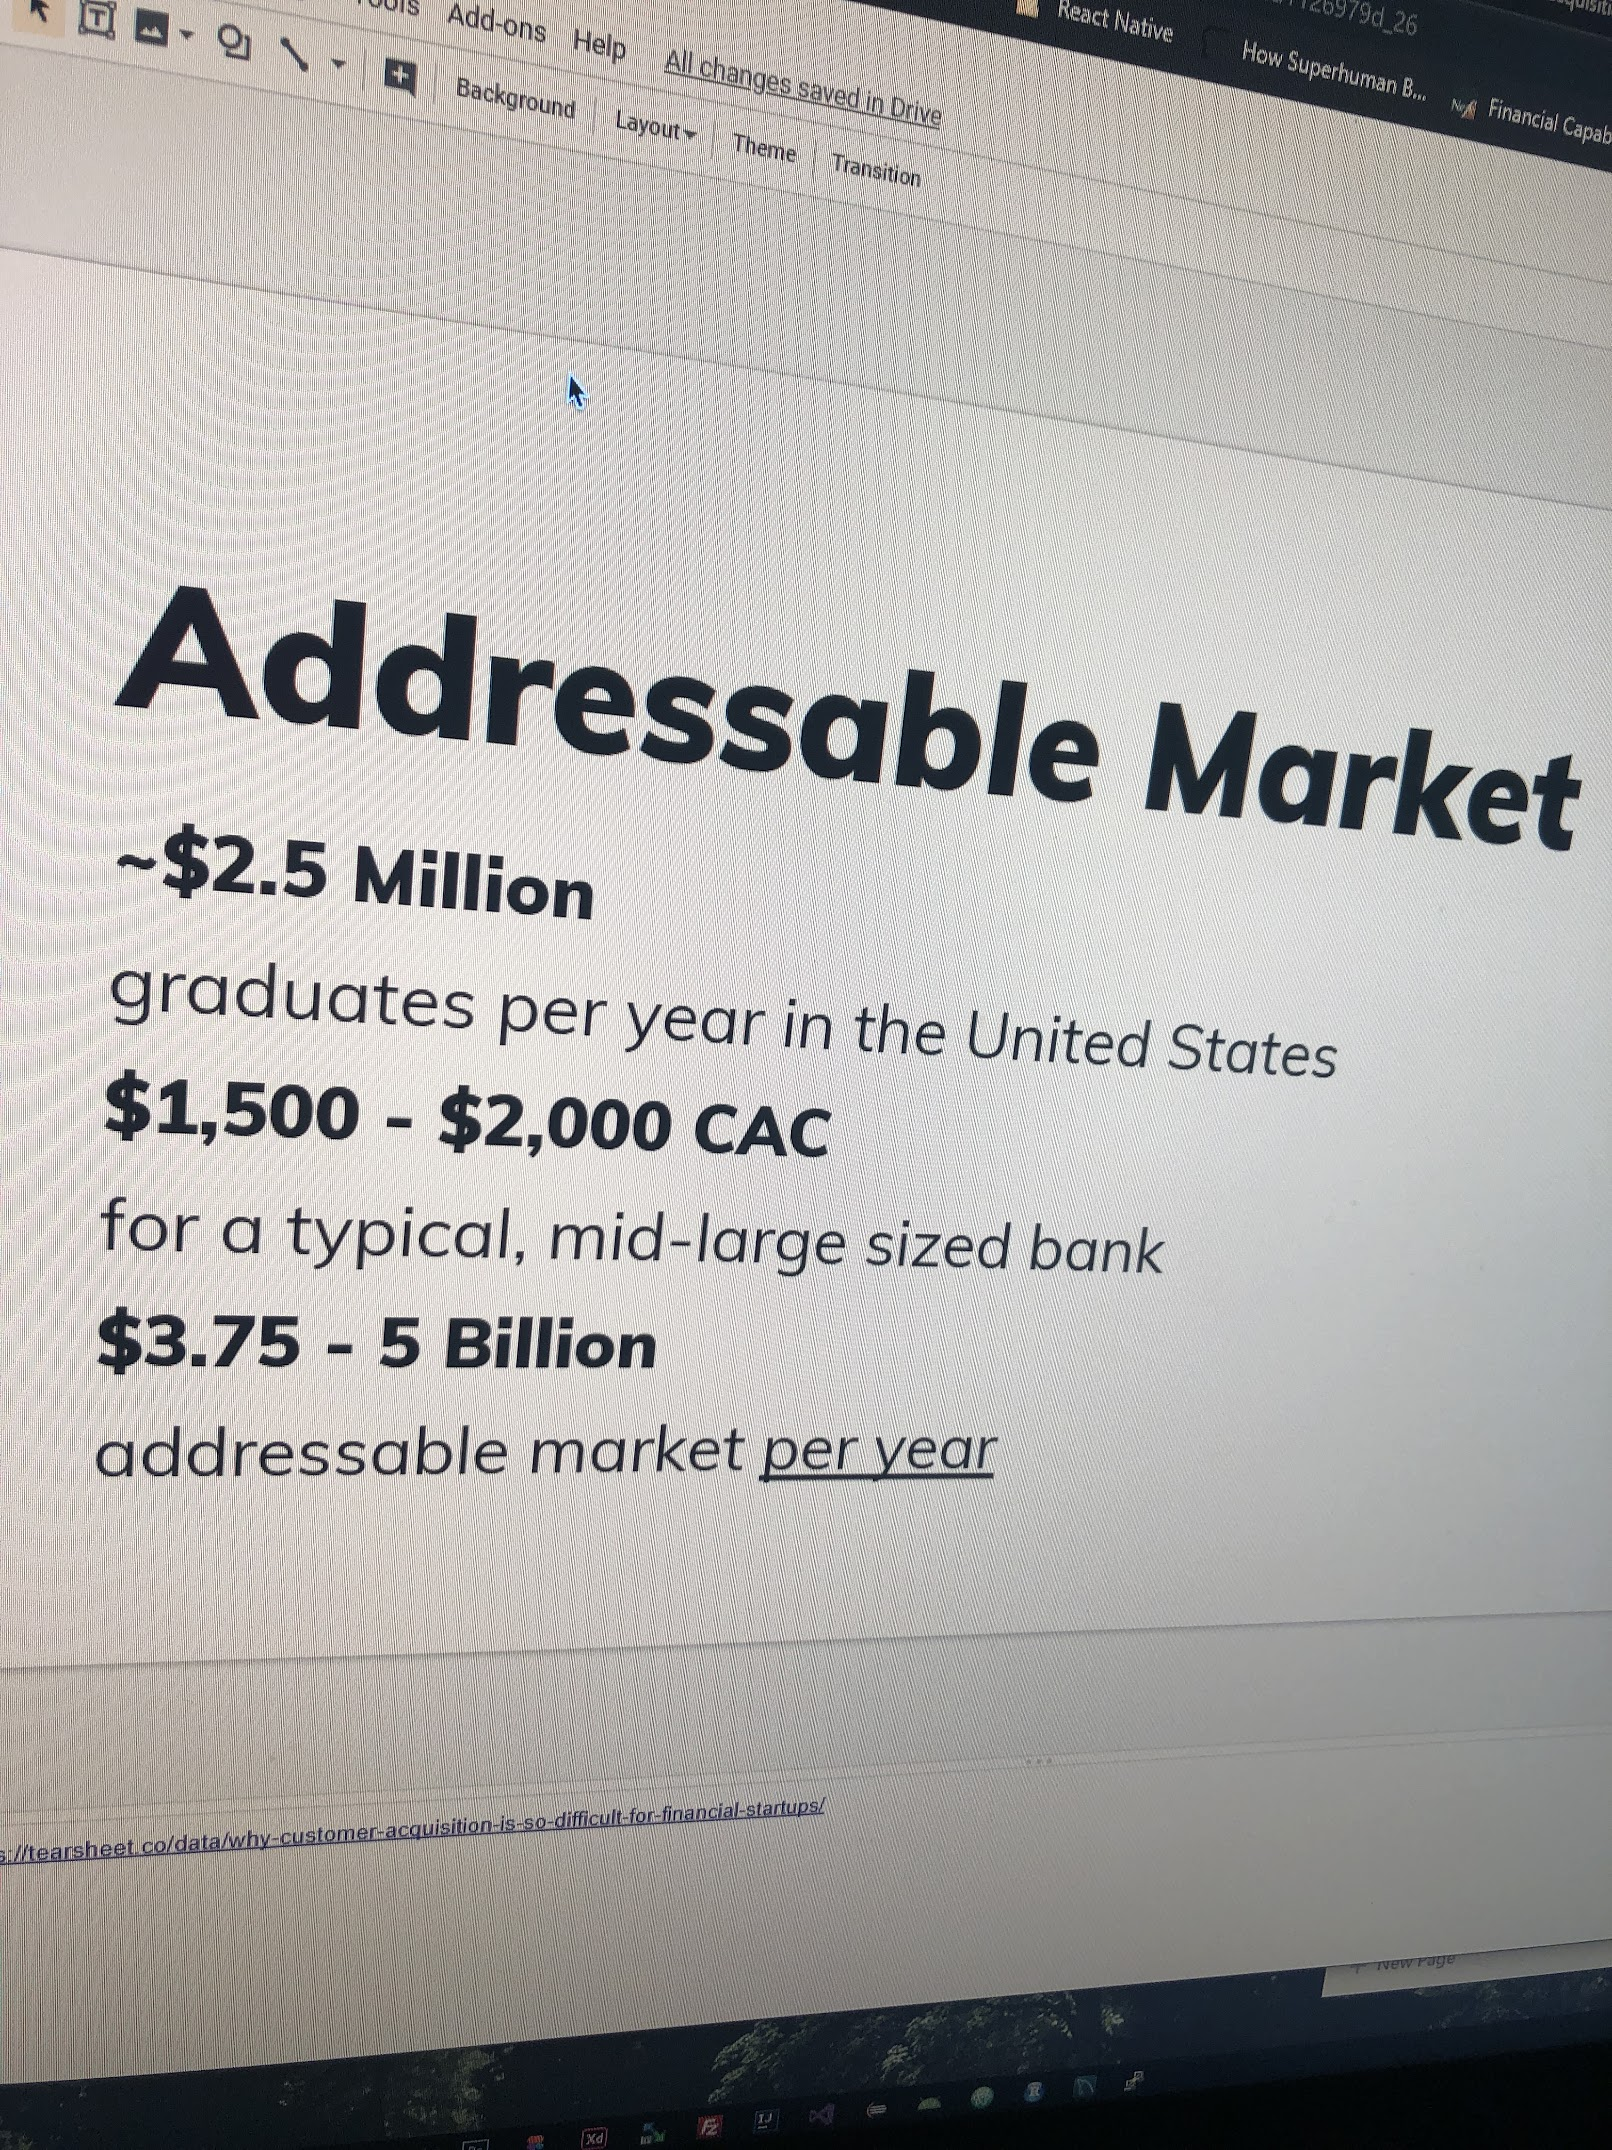 How could you say no to this addressable market?!?